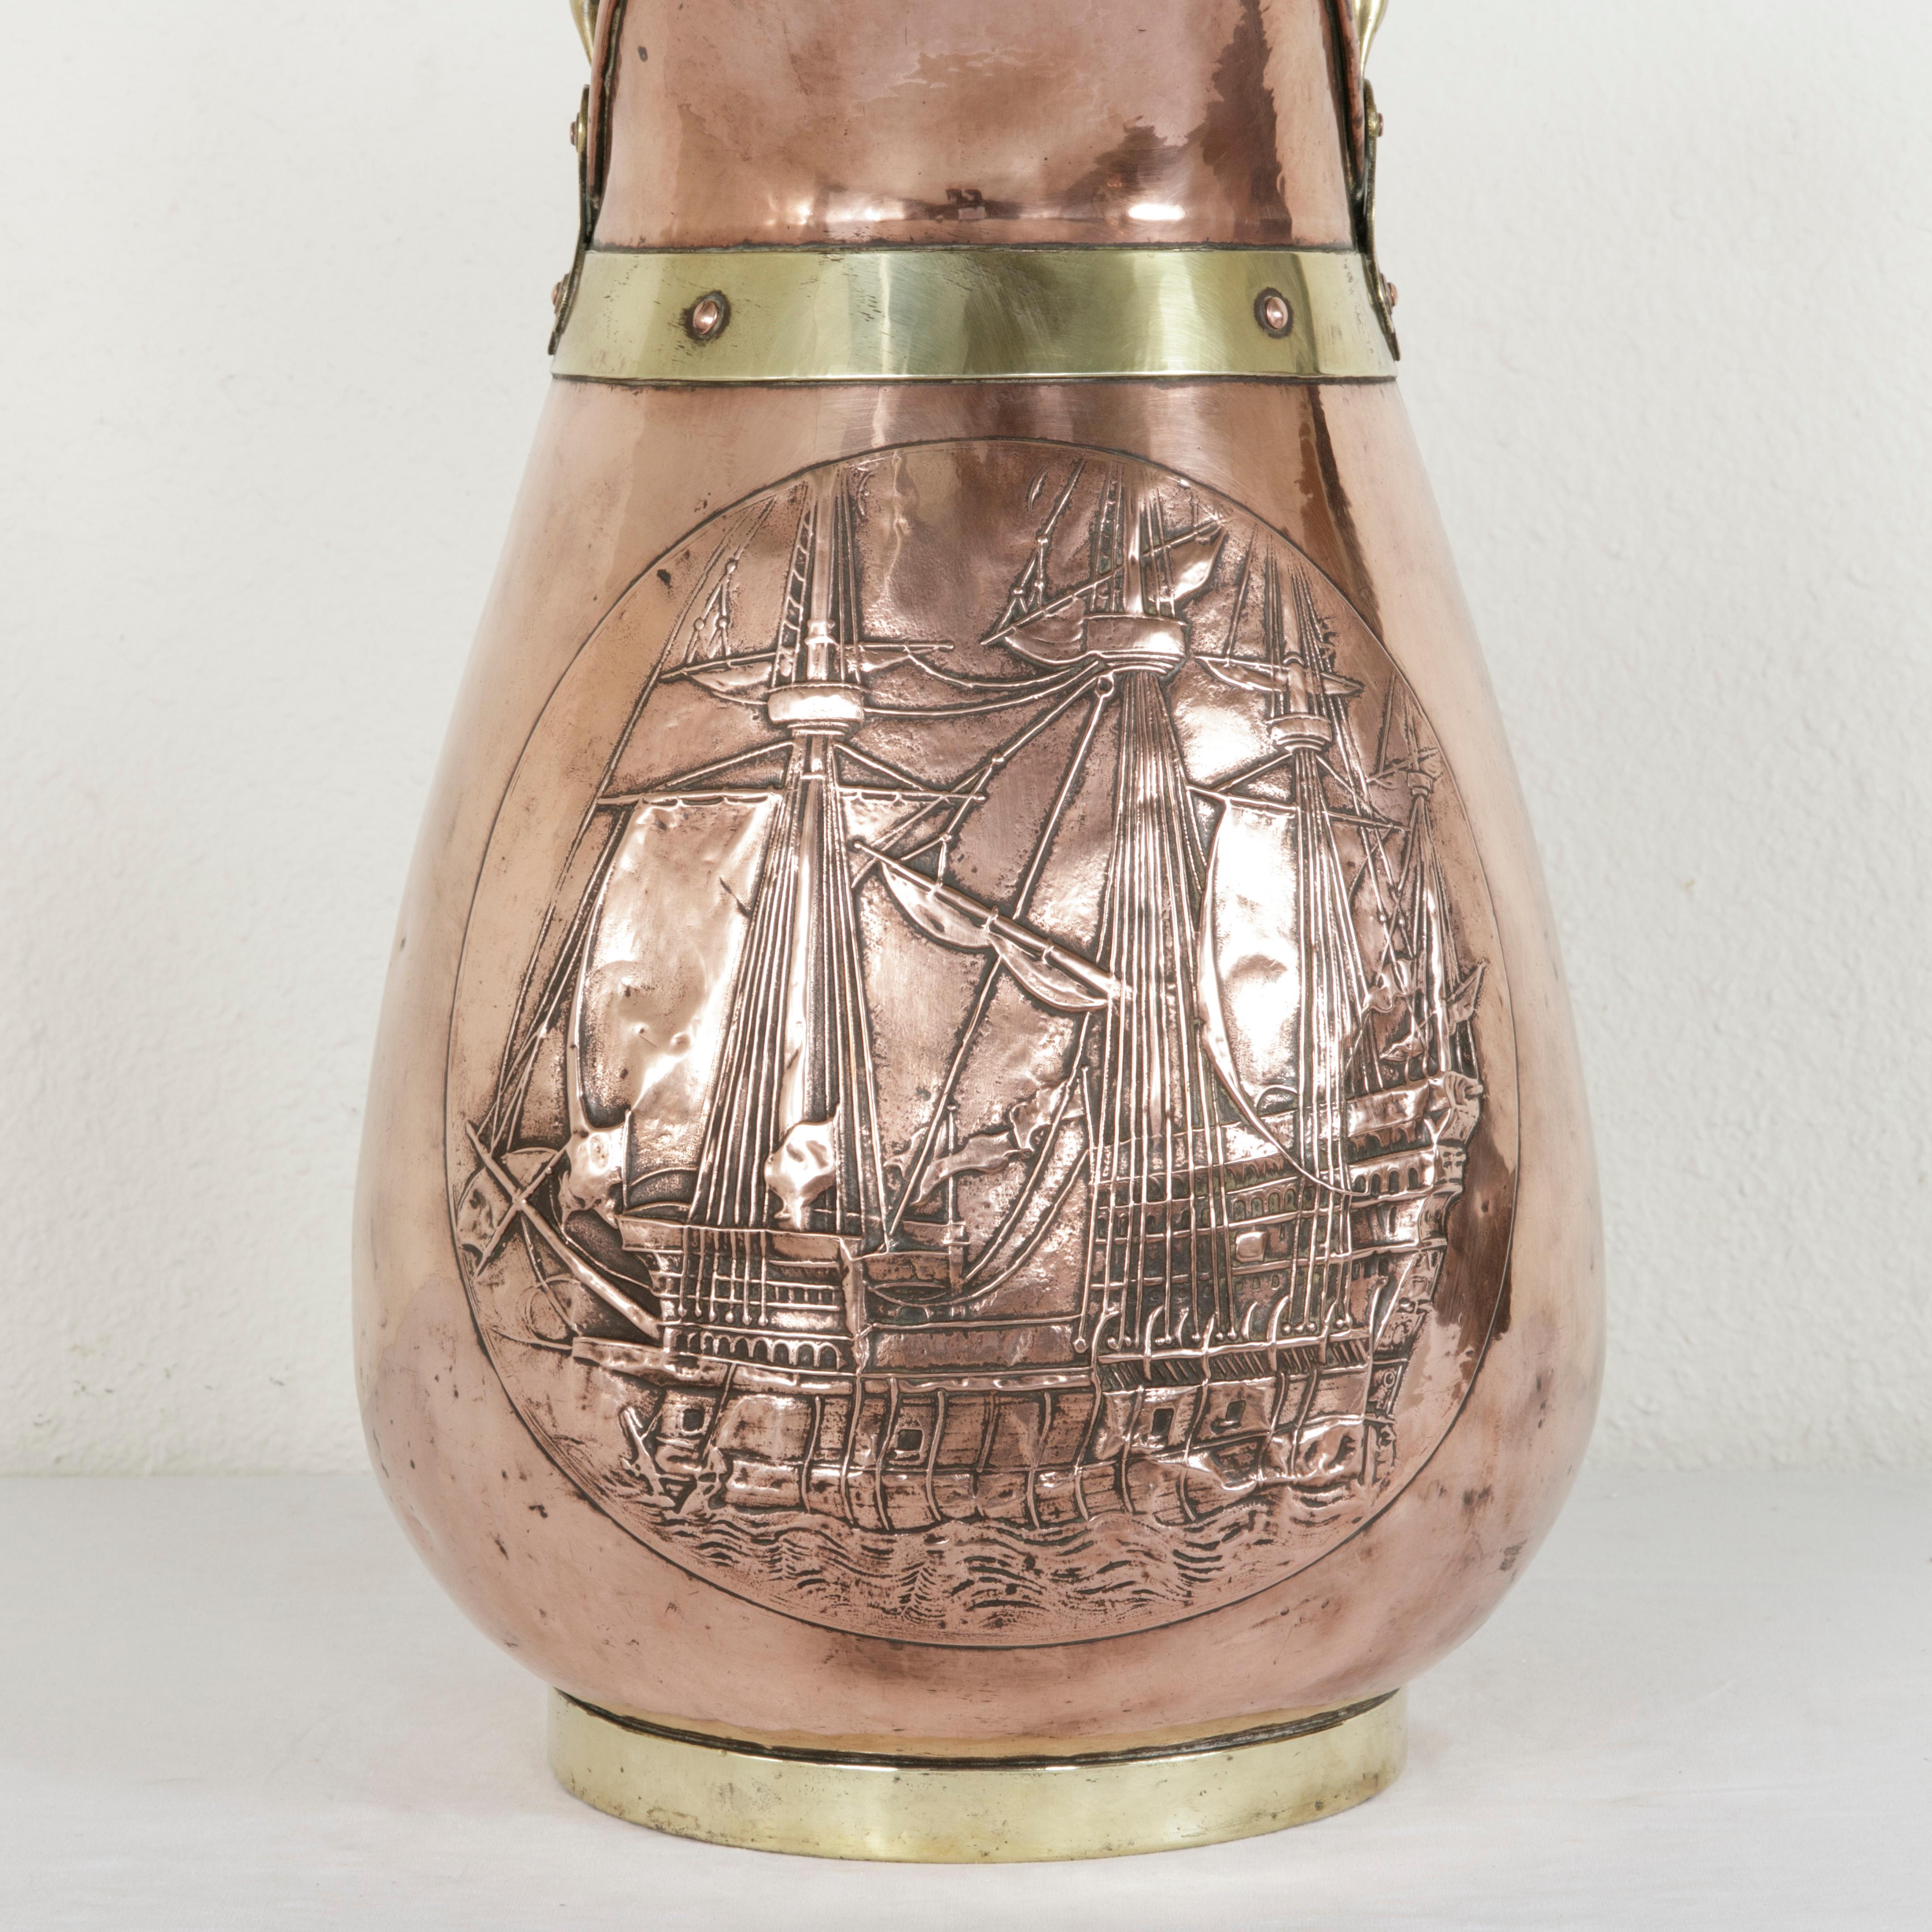 20th Century Large Copper Repousse Pitcher or Umbrella Stand with Nautical Galleon Motif